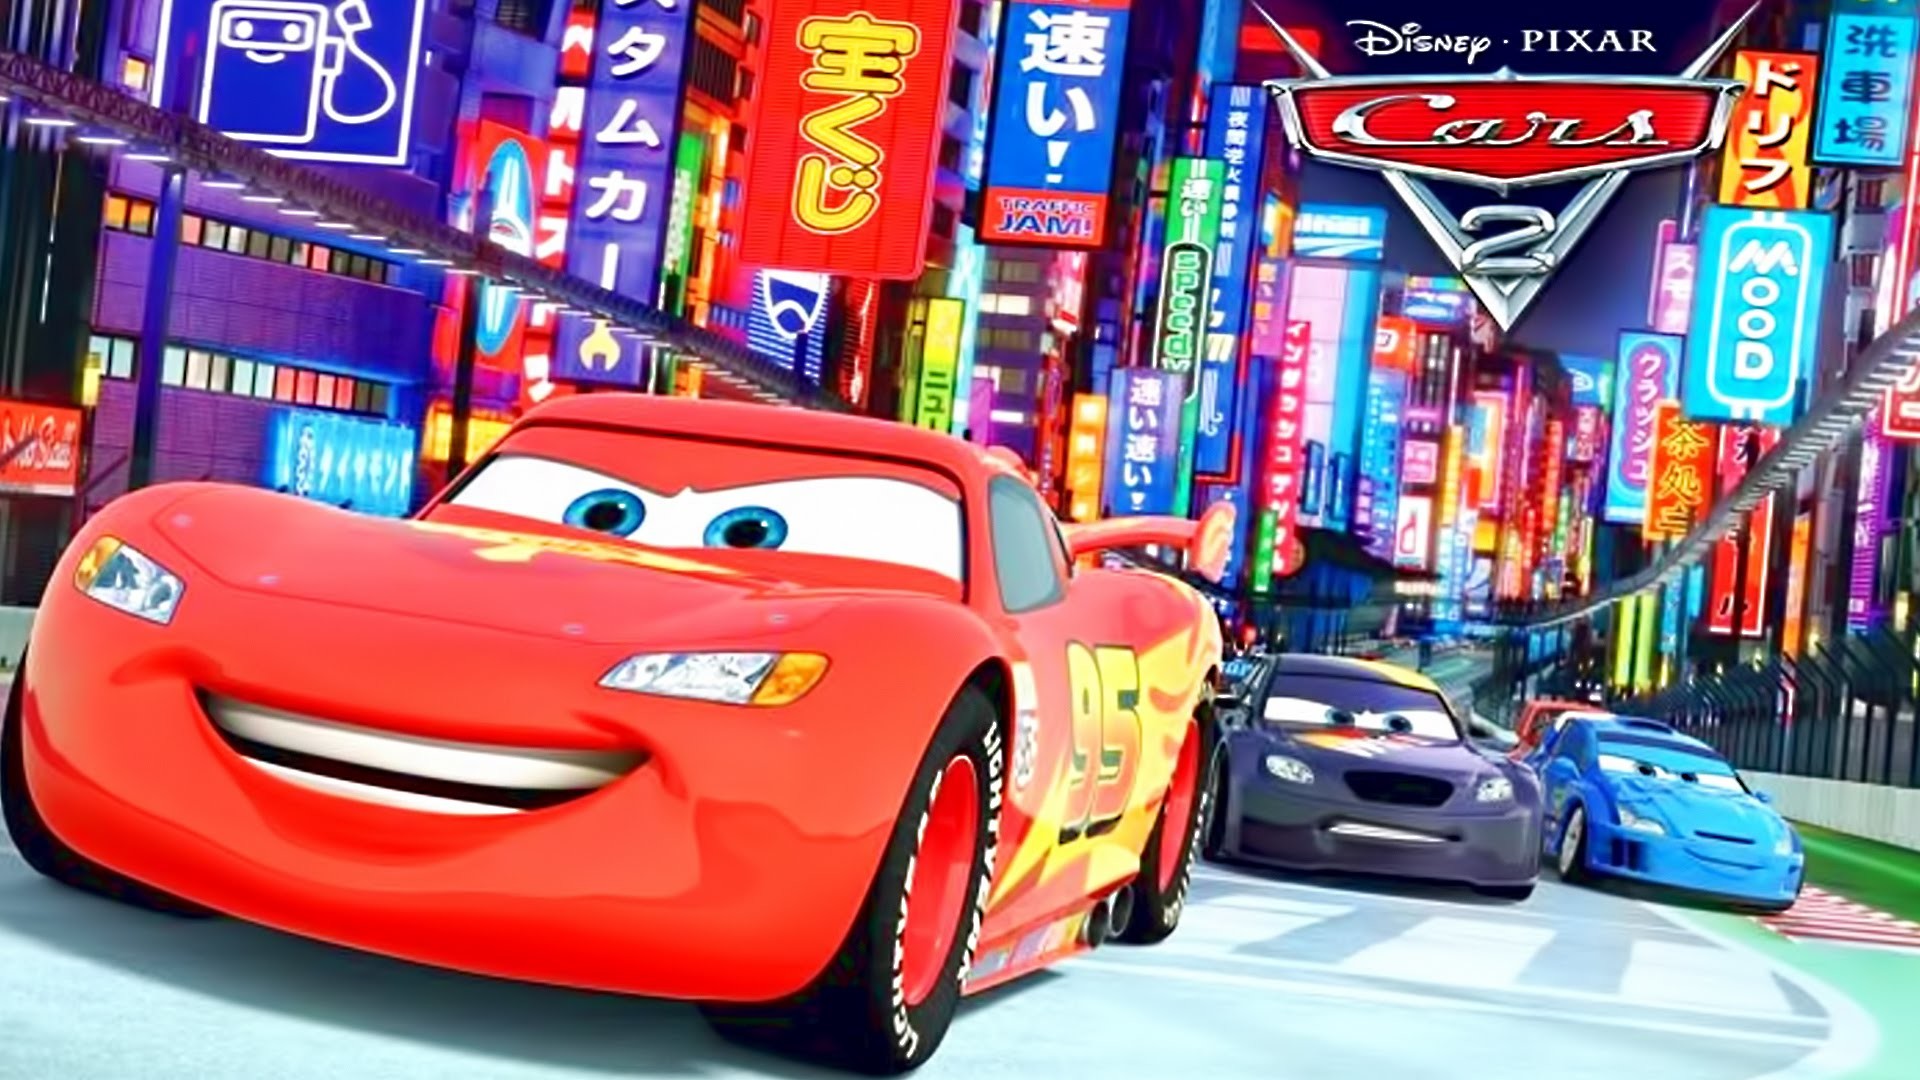 1920x1080 Cartoon CARS Lightning Mcqueen Cars Racing Tow Mater in an Epic Race! -  YouTube